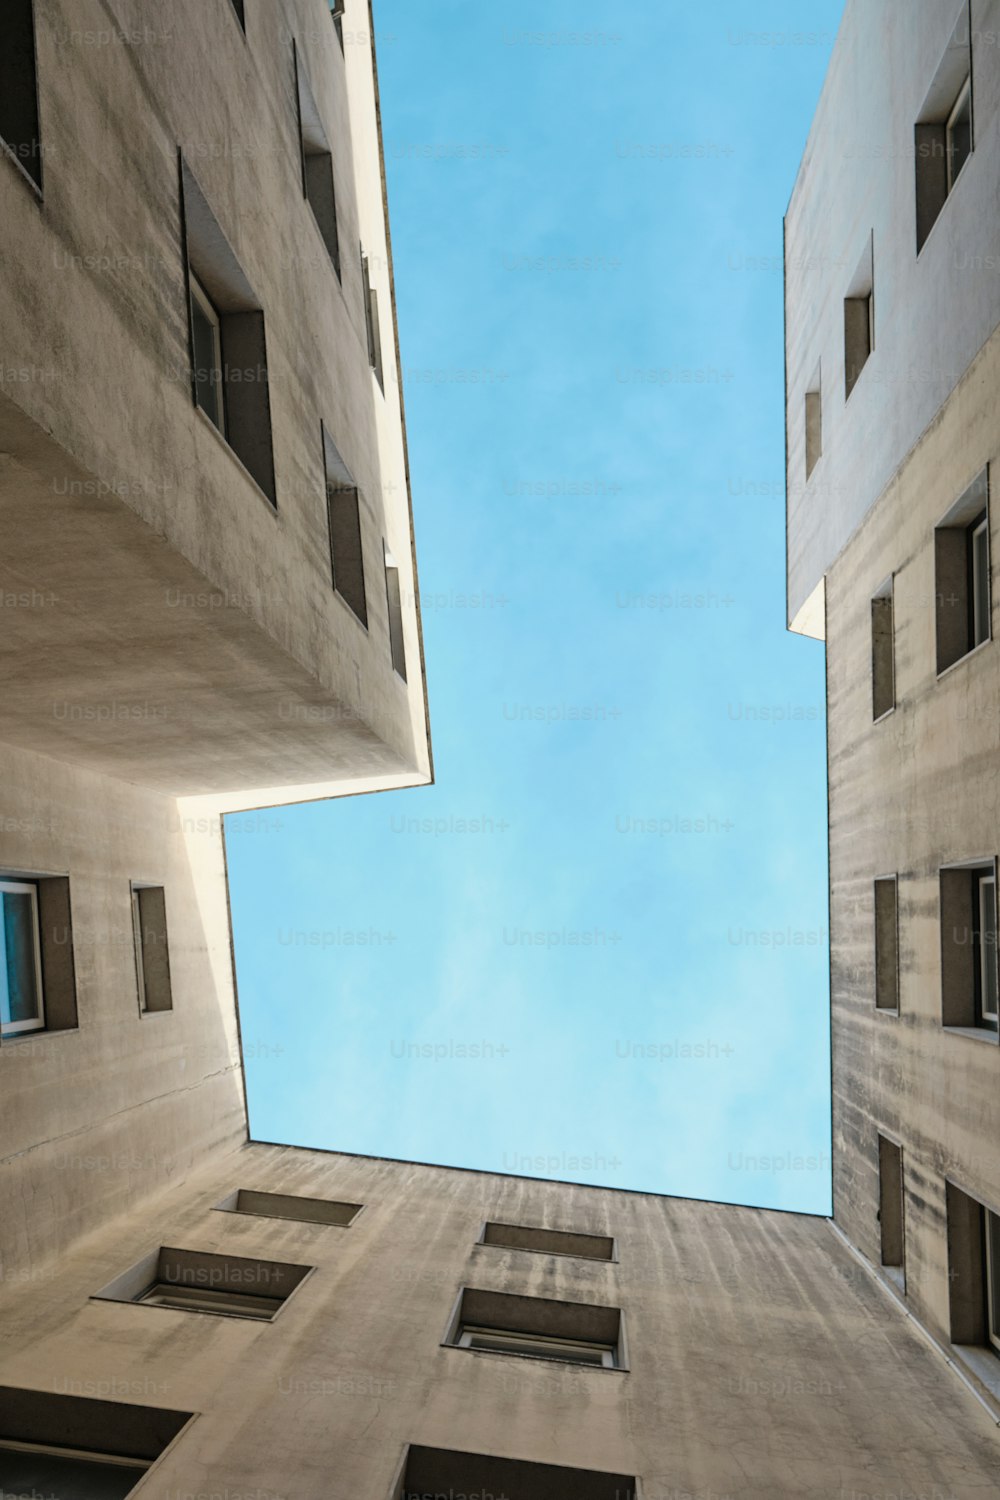 looking up at the sky from between two buildings